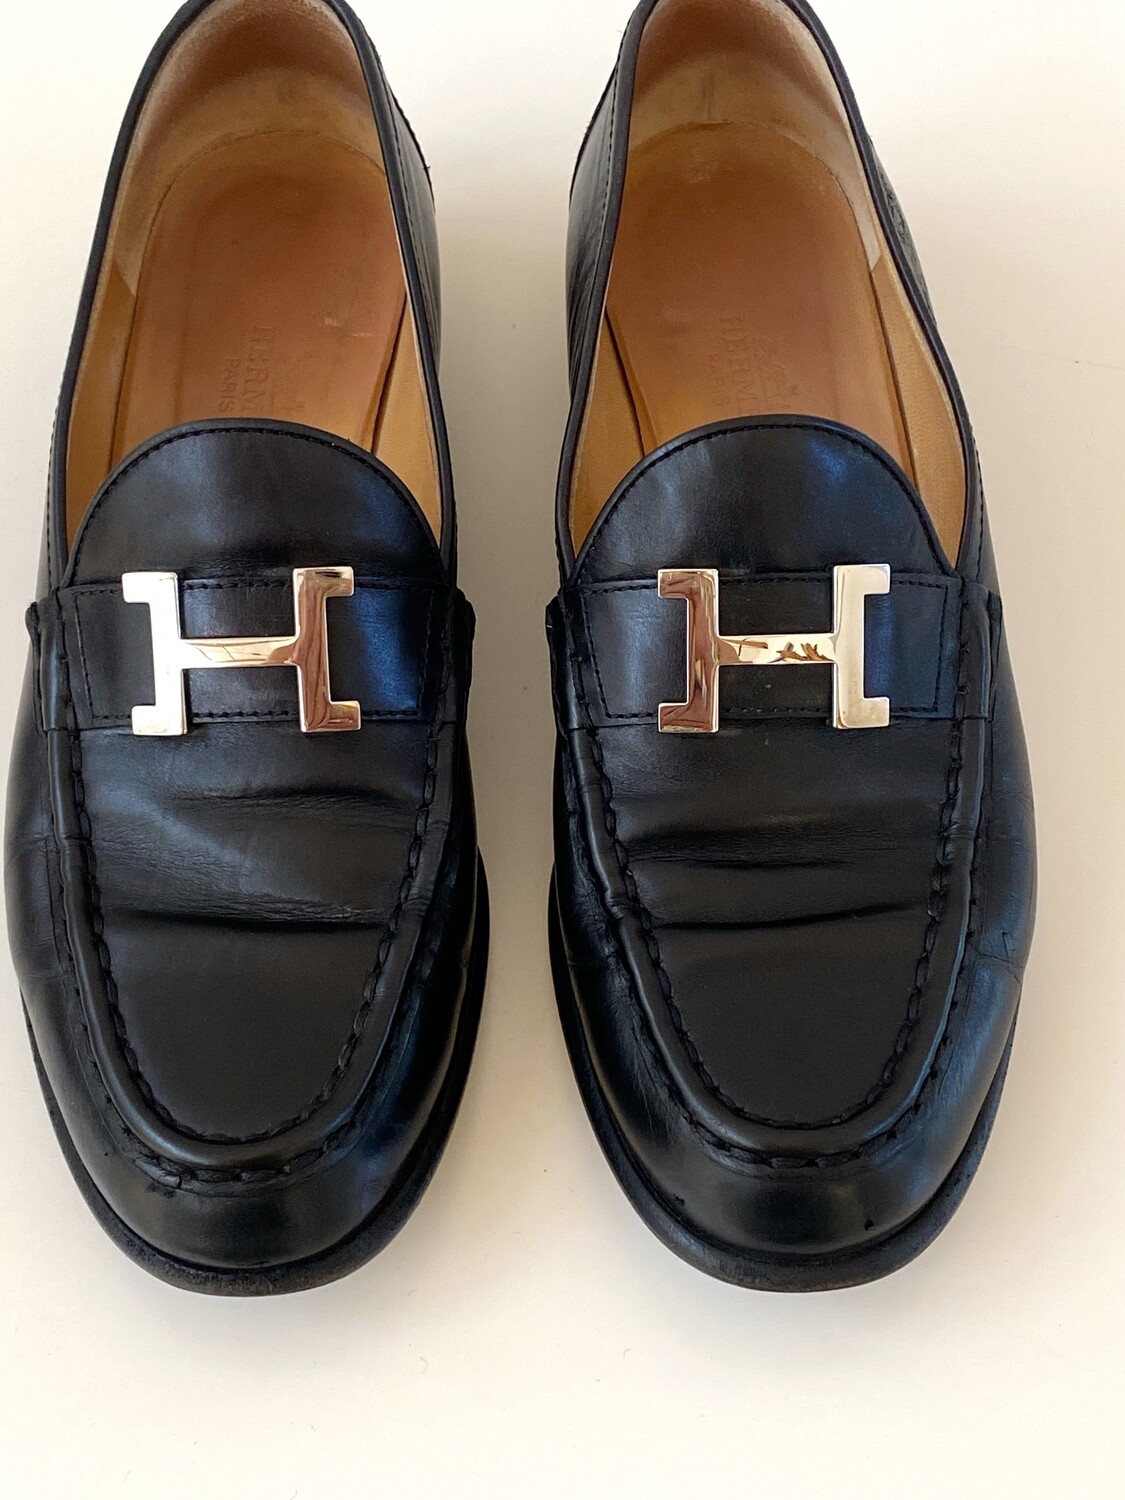 HERMES H LOGO SILVER BLACK LEATHER LOAFERS IT 38.5 / US 8 - 8.5